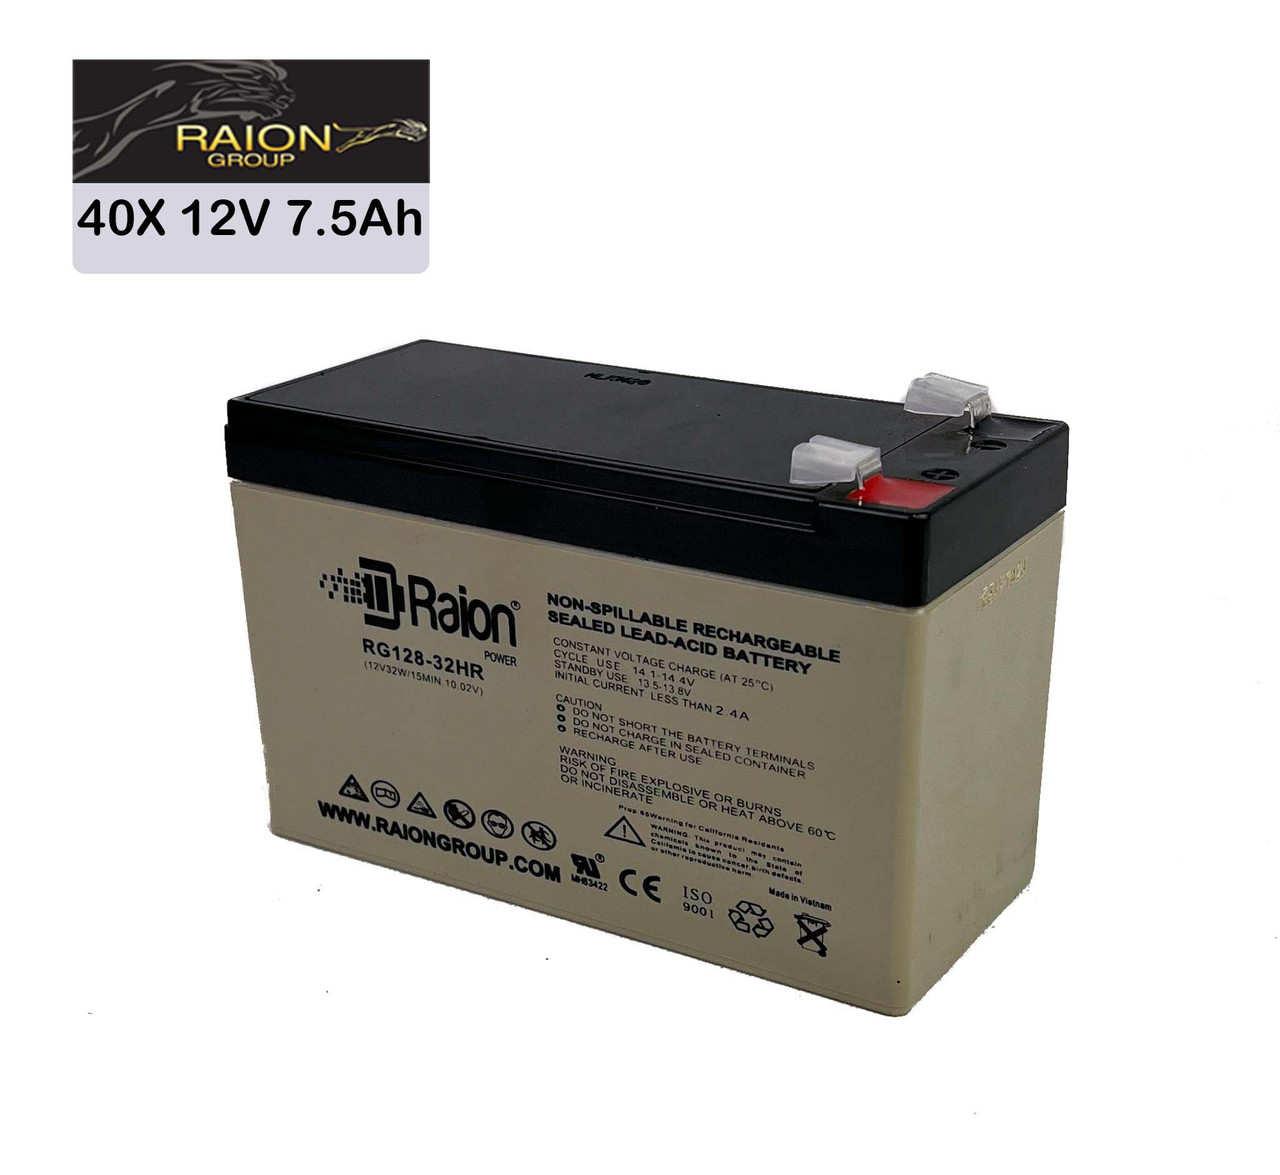 Raion Power 12V 7.5Ah High Rate Discharge UPS Batteries for OPTI-UPS DS20KB31 - 40 Pack